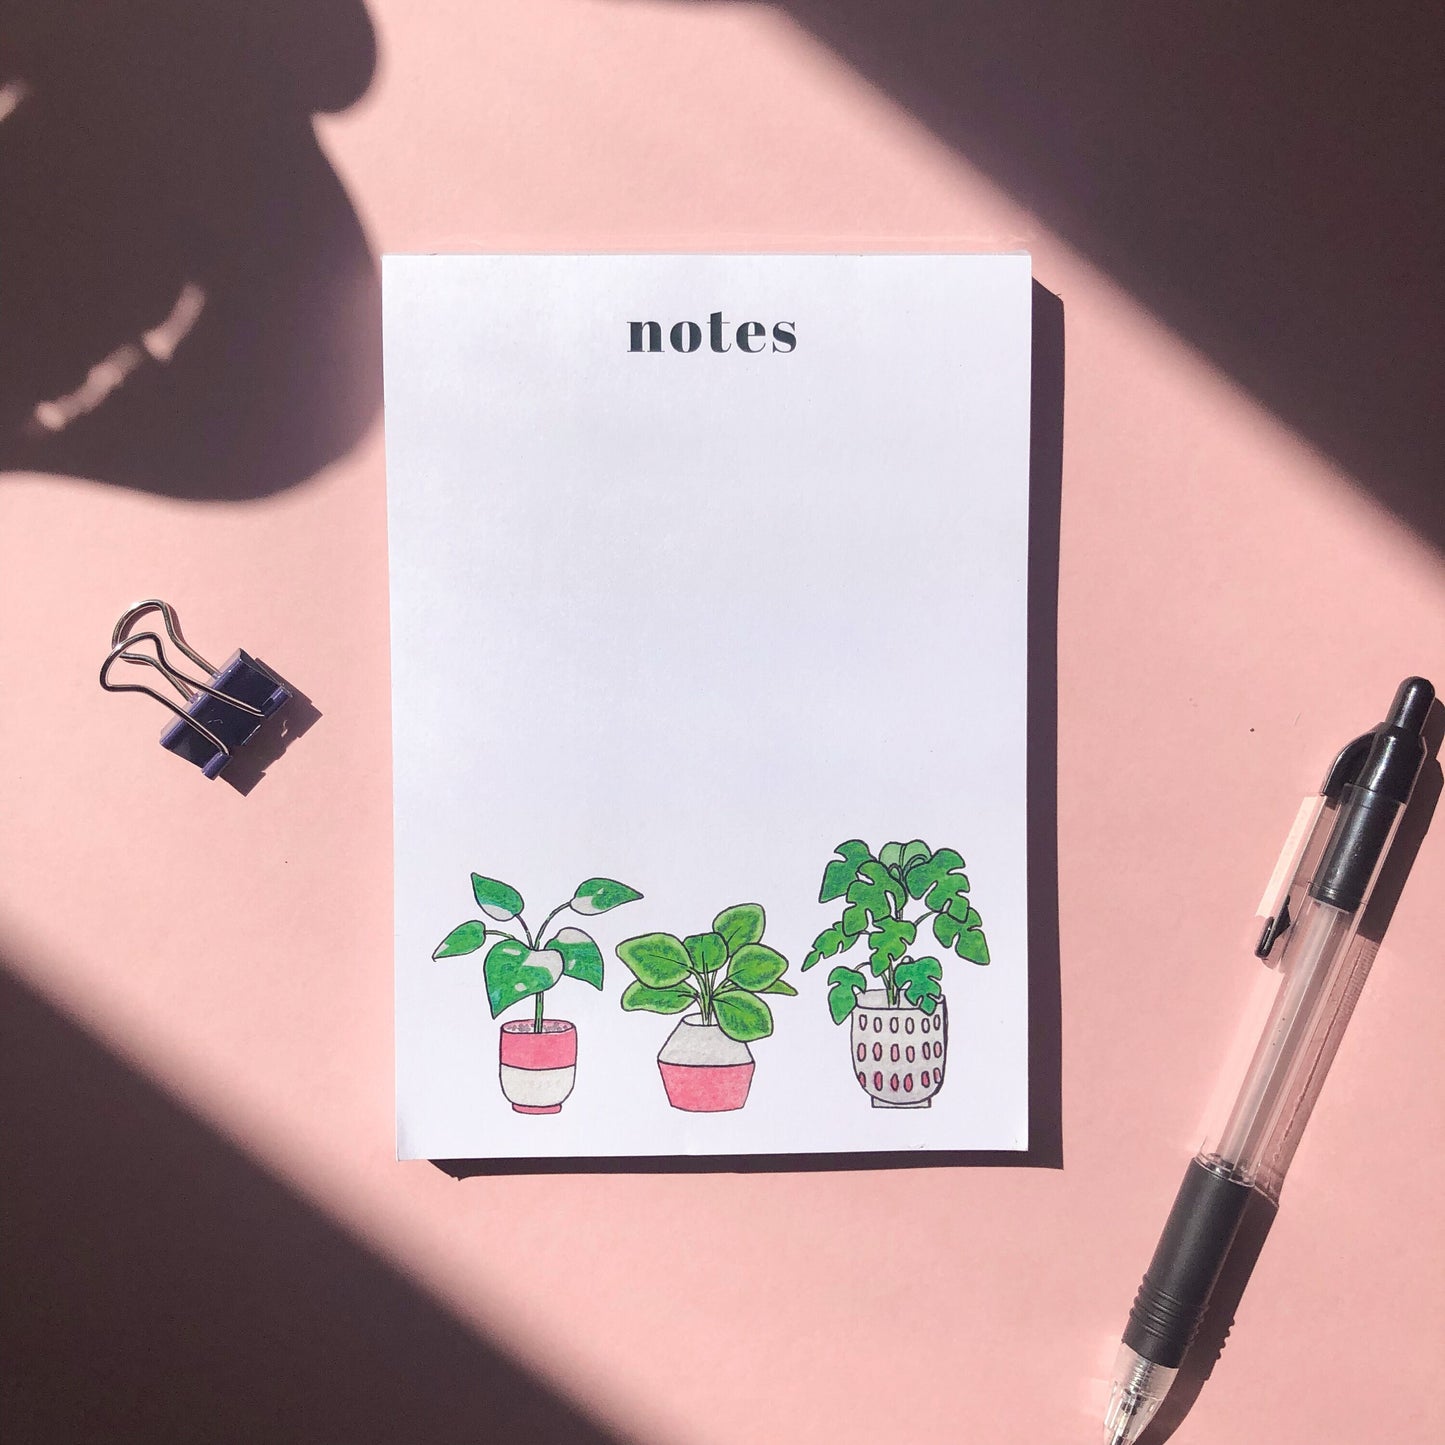 AHouse Plant A6 Notepad, Plant Illustration To Do List Memo Pad, 50 Pages Minimal Planner - Monstera, Calathea, Plant Lover Stationery Gift